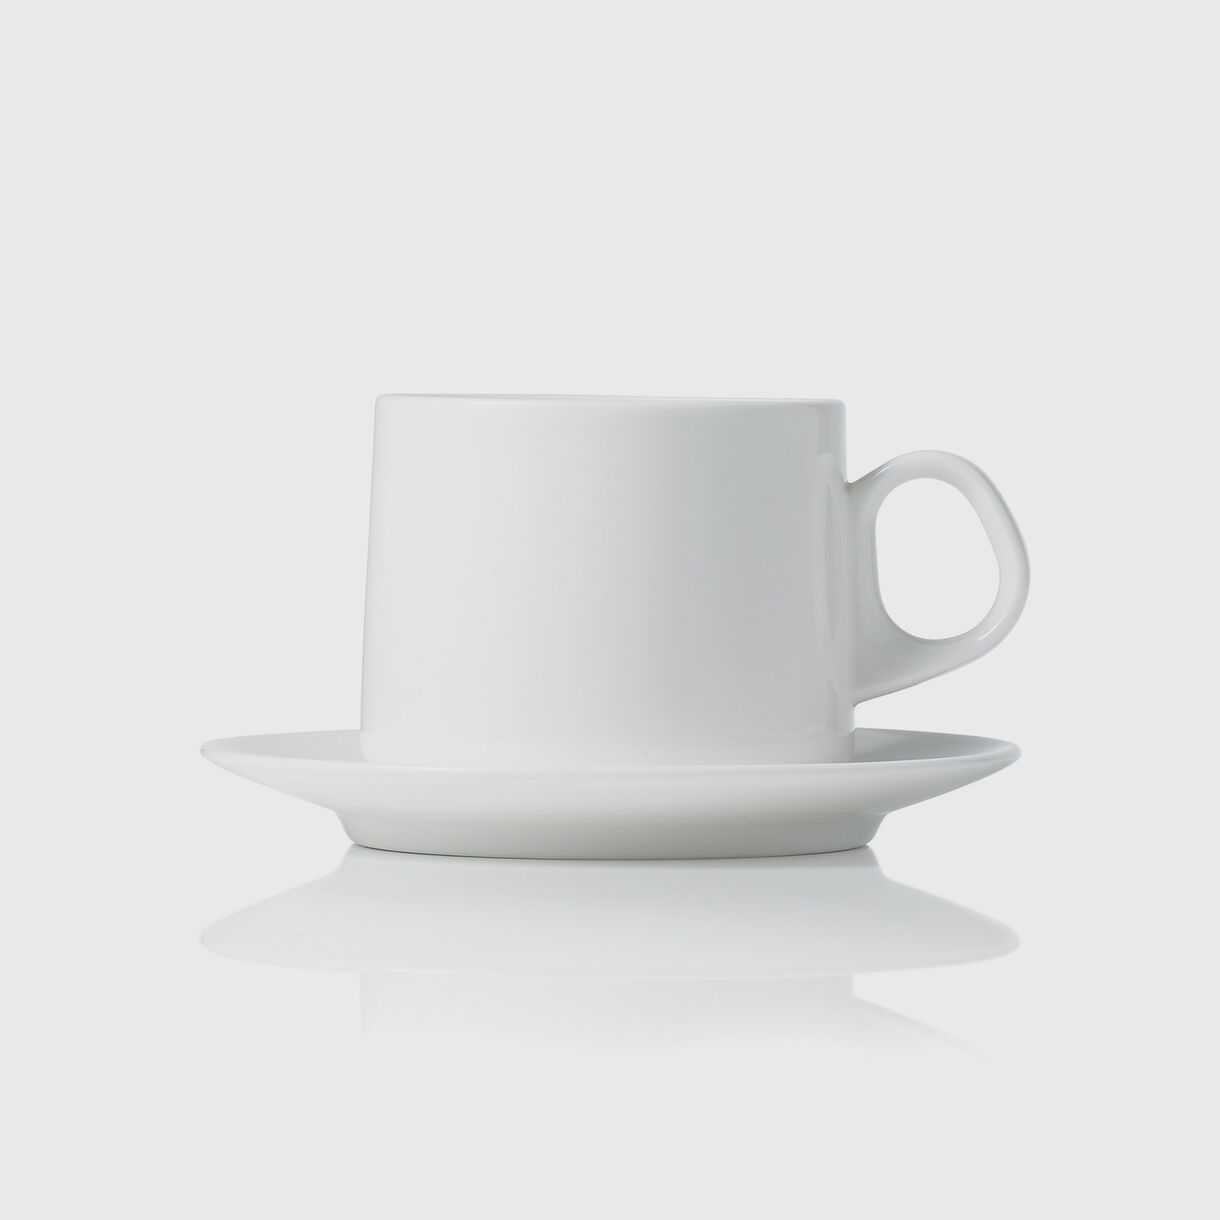 David Caon by Noritake Cup and Saucer